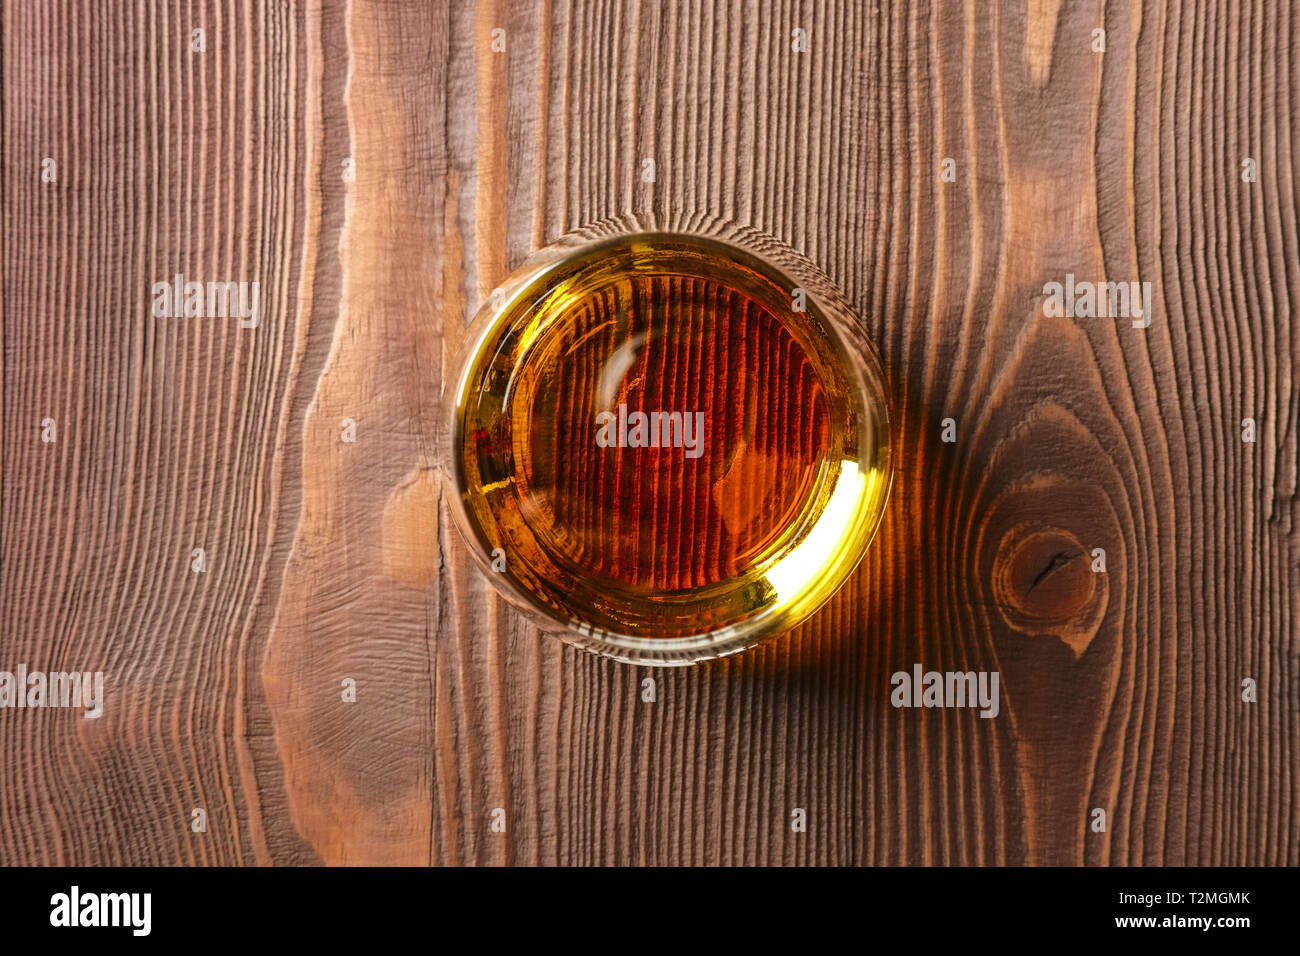 Snifter glass with pure whiskey on wooden table Stock Photo